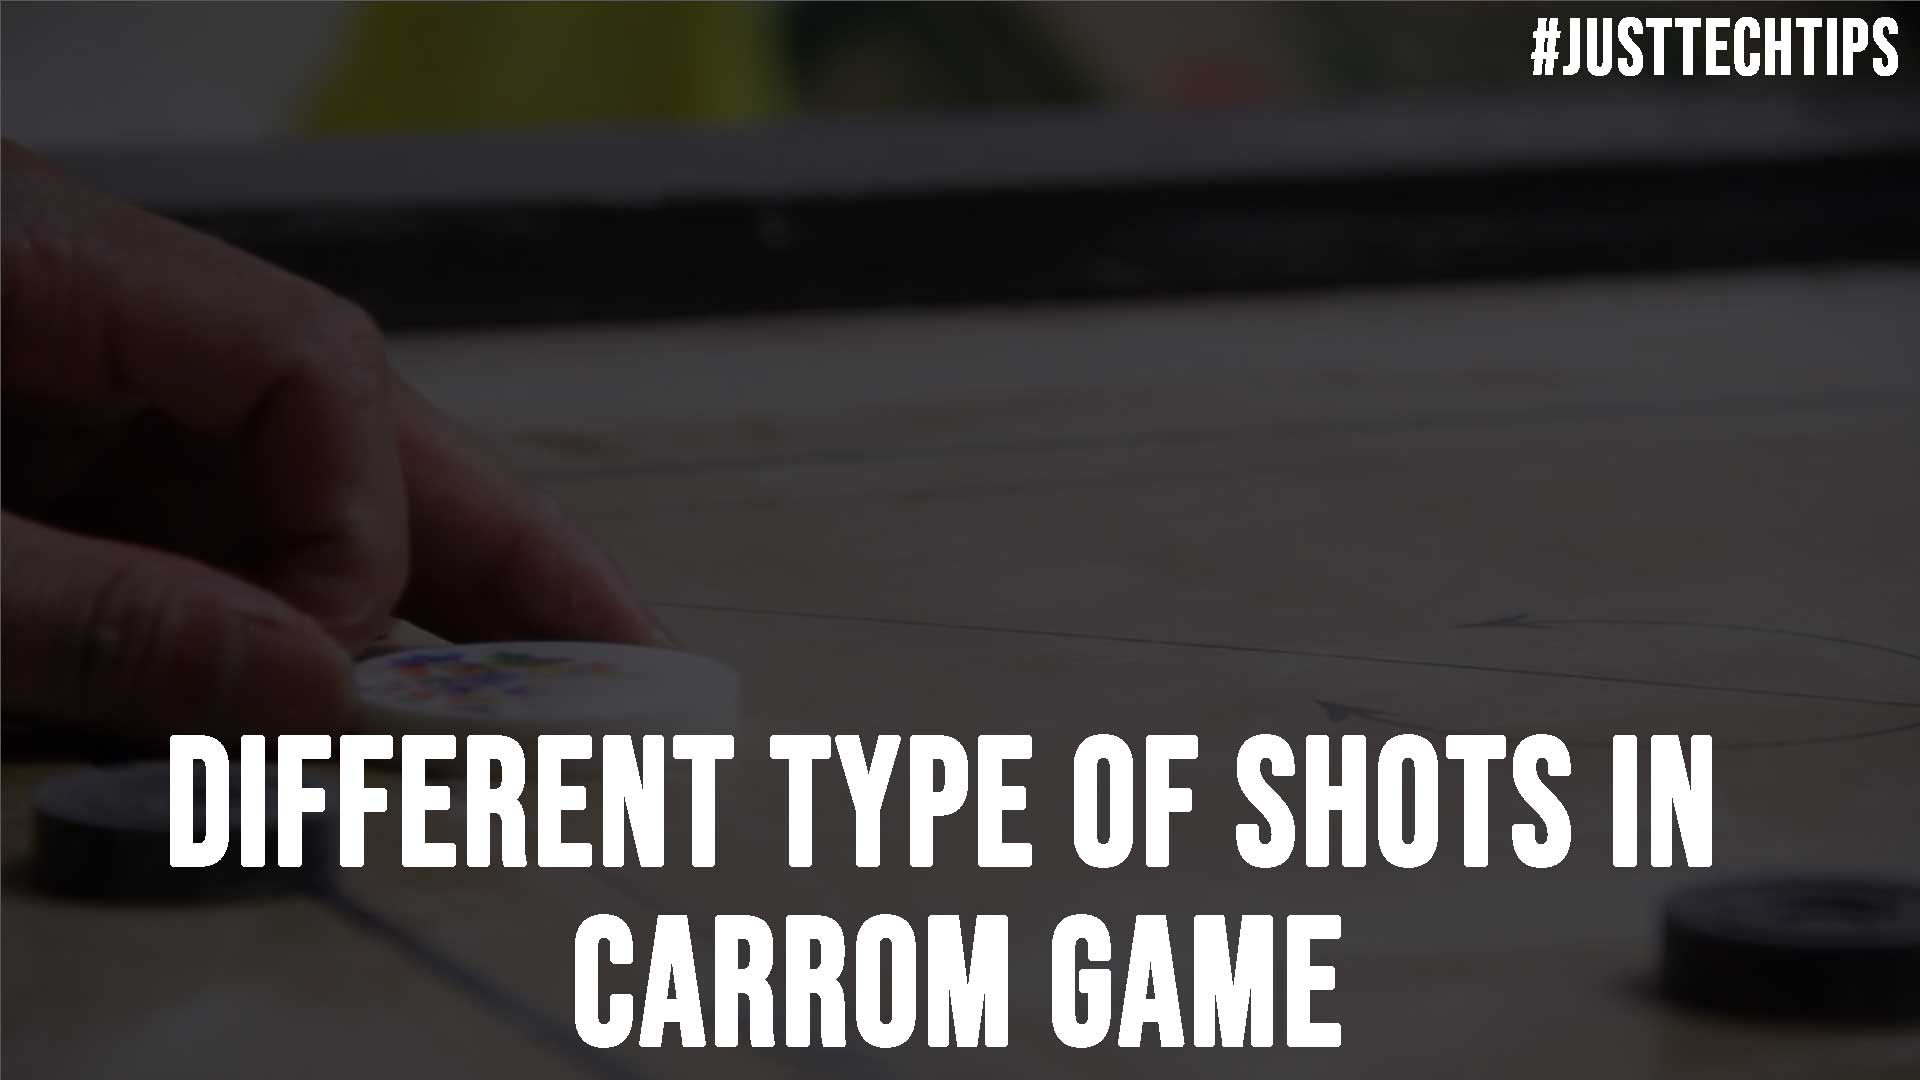 Different Type of Shots in Carrom Game